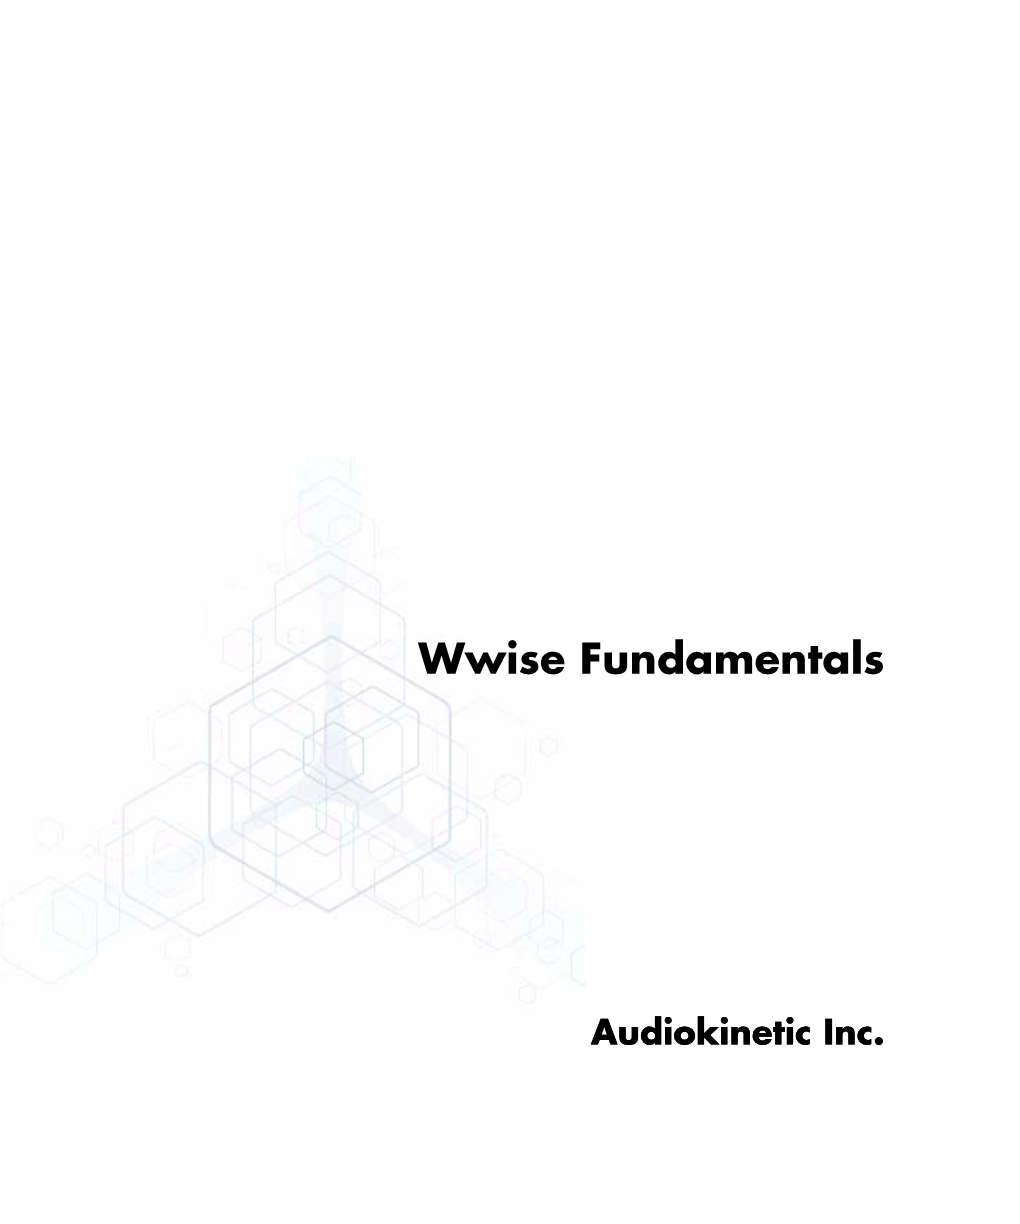 Audiokinetic Wwise Fundamentals